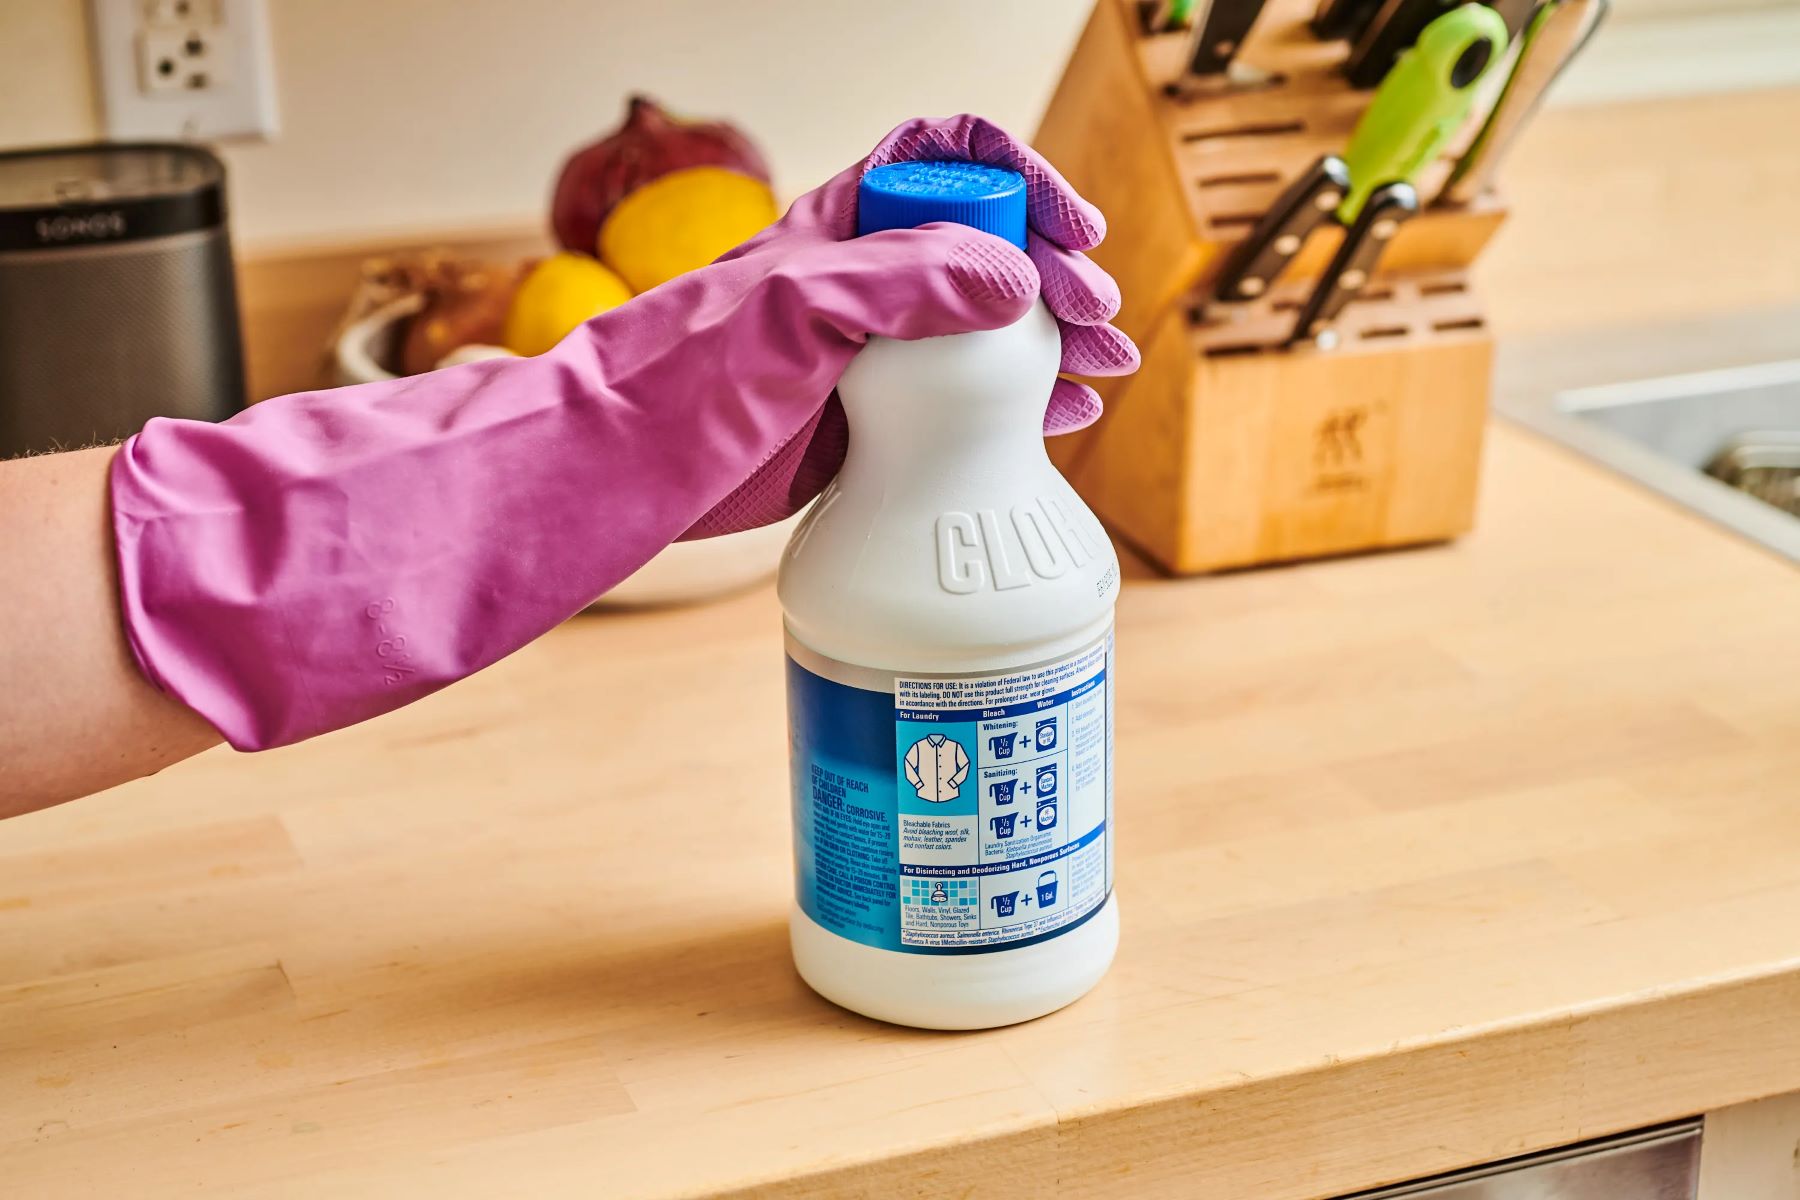 You Won't Believe What Happened When I Mixed Bleach And Another Cleaning Agent!